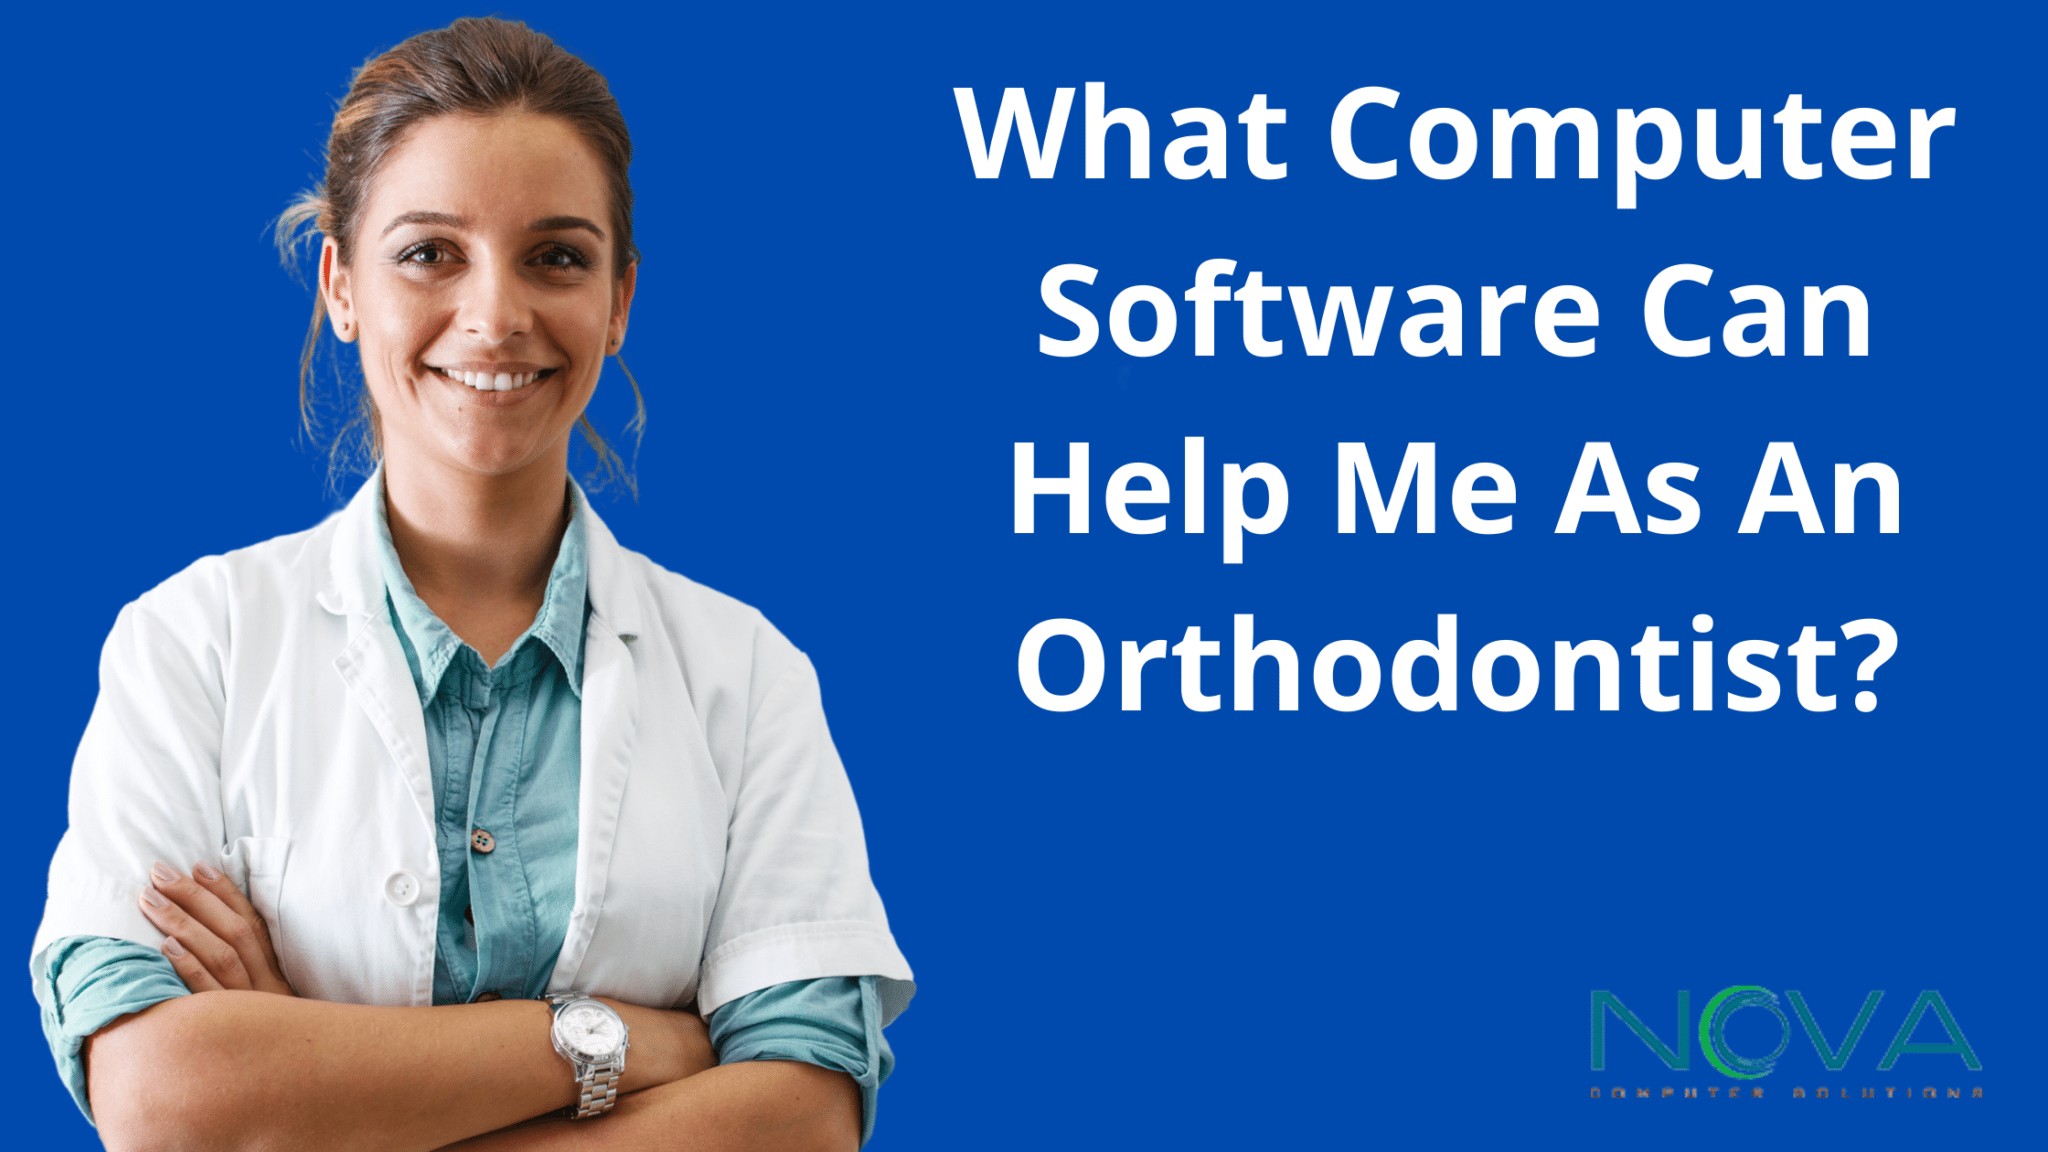 What Computer Software Can Help Me As An Orthodontist?